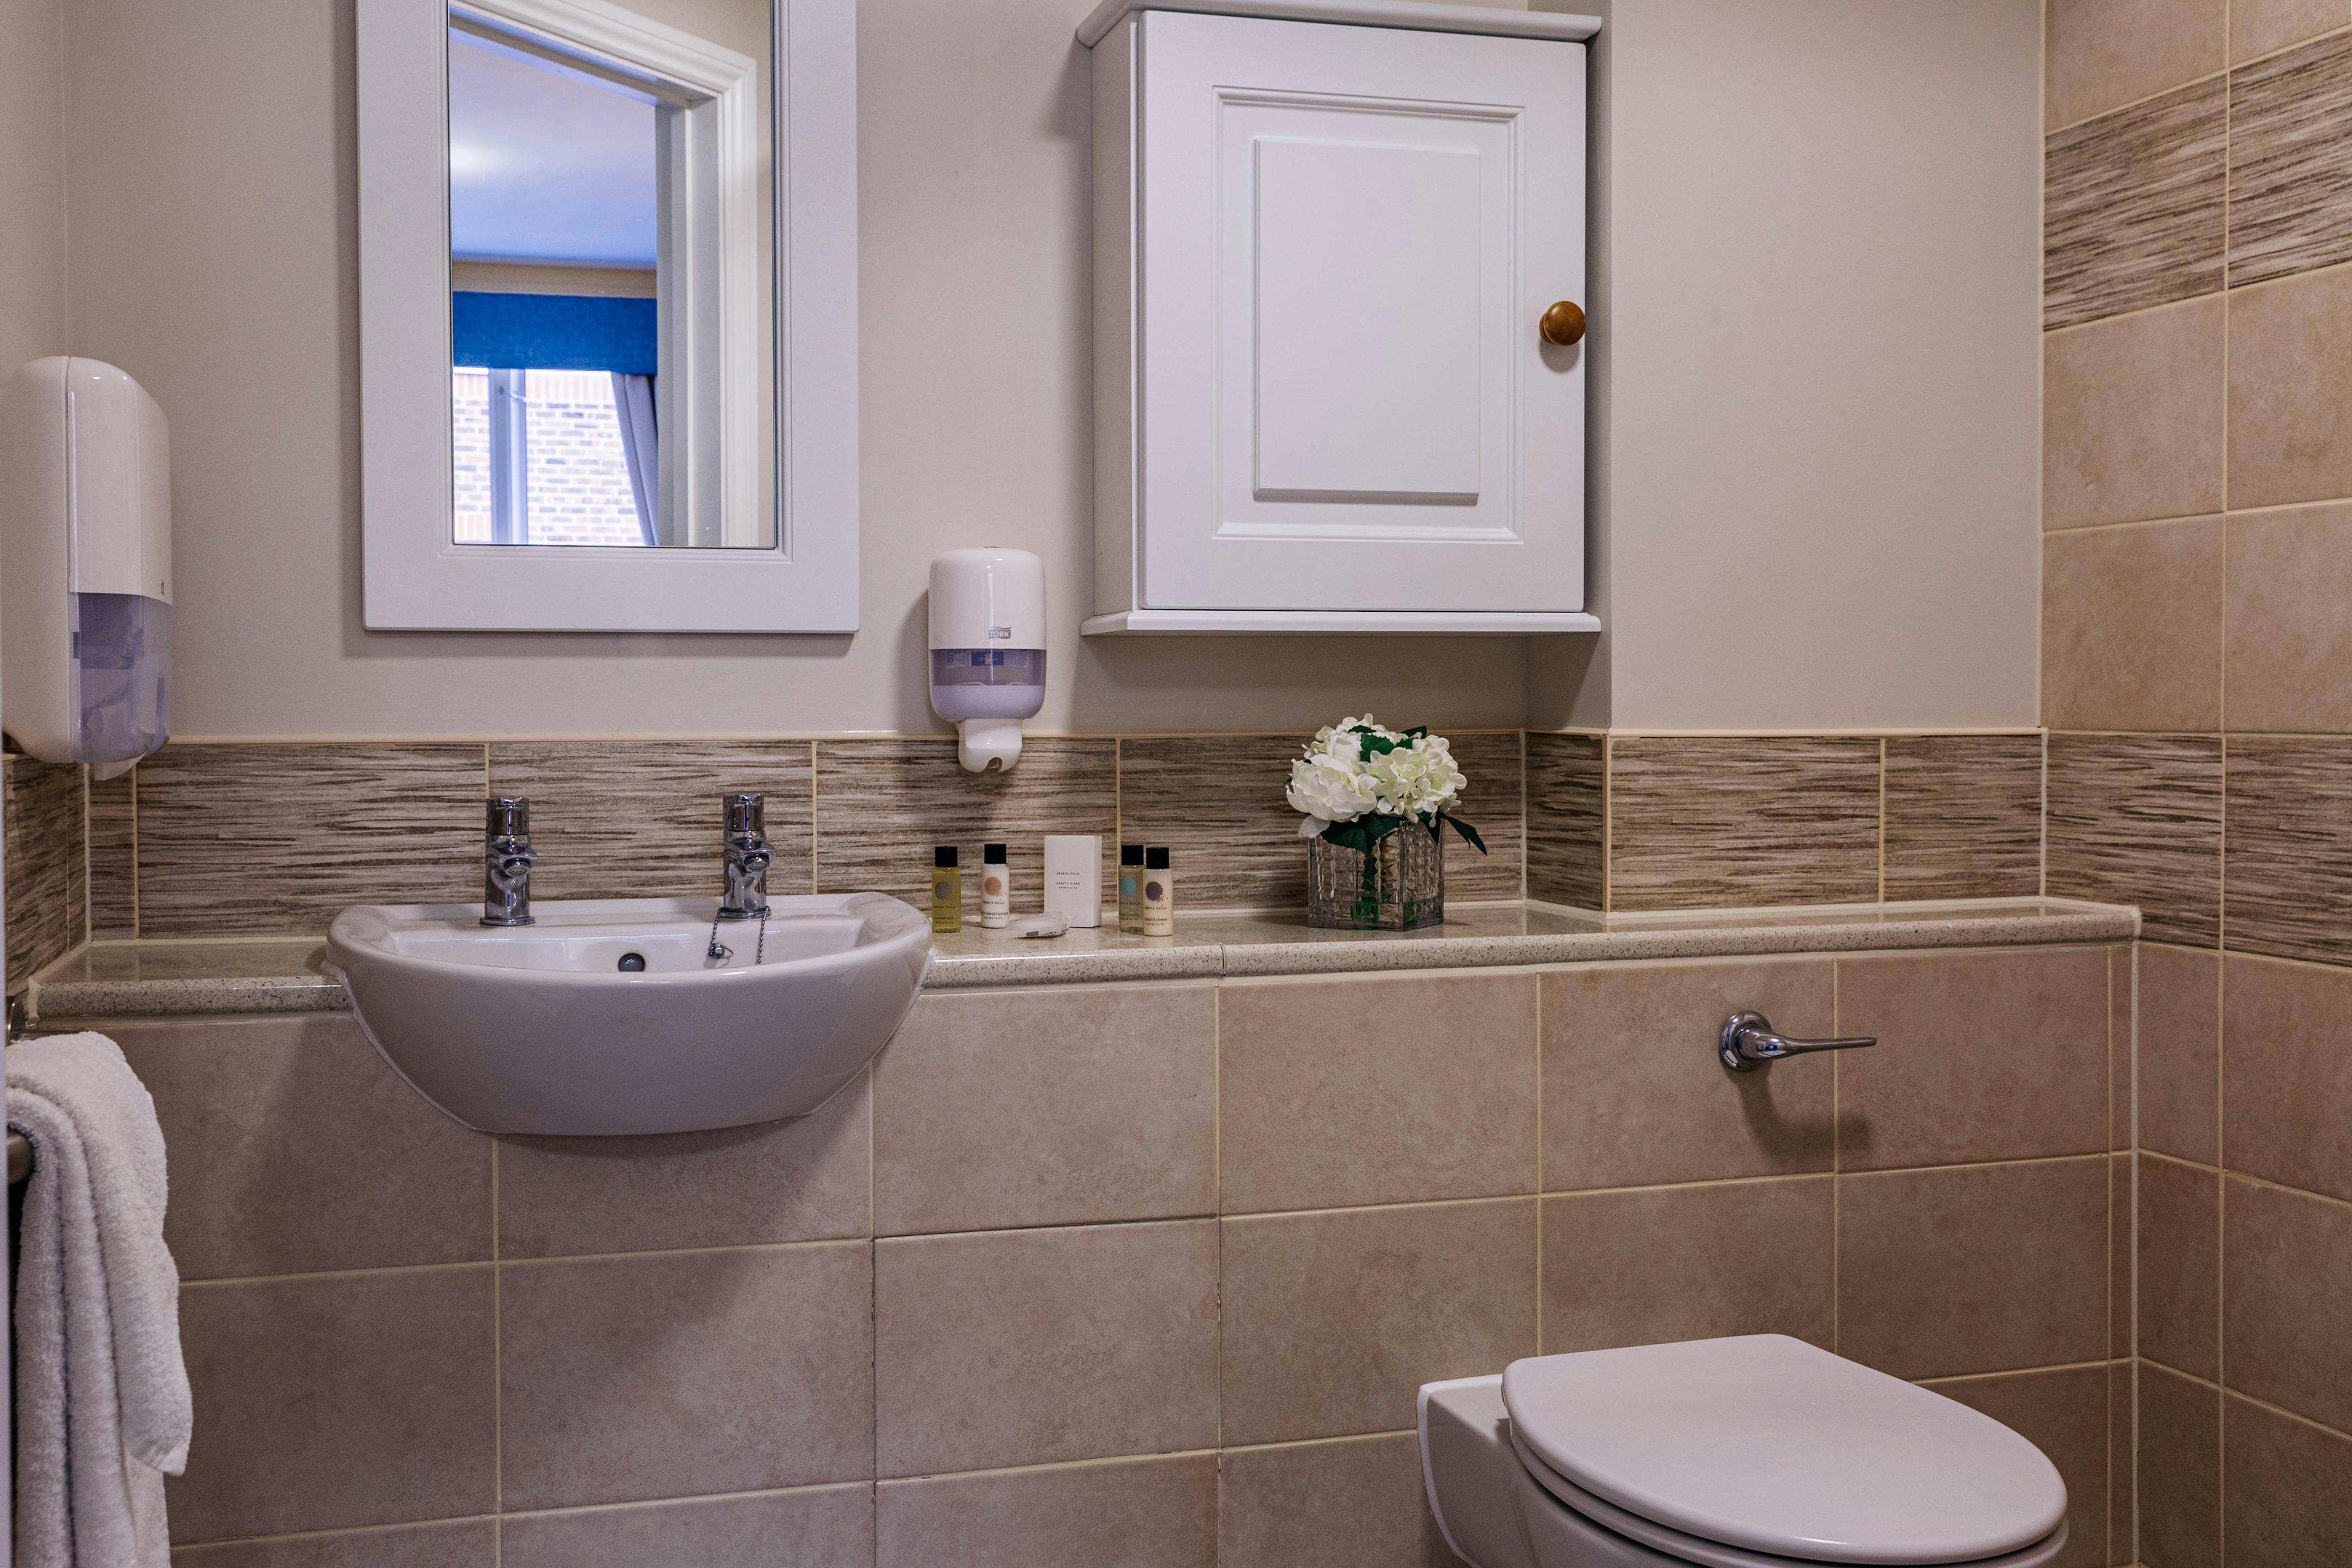 Bathroom at Magnolia Court Care Home in London, England